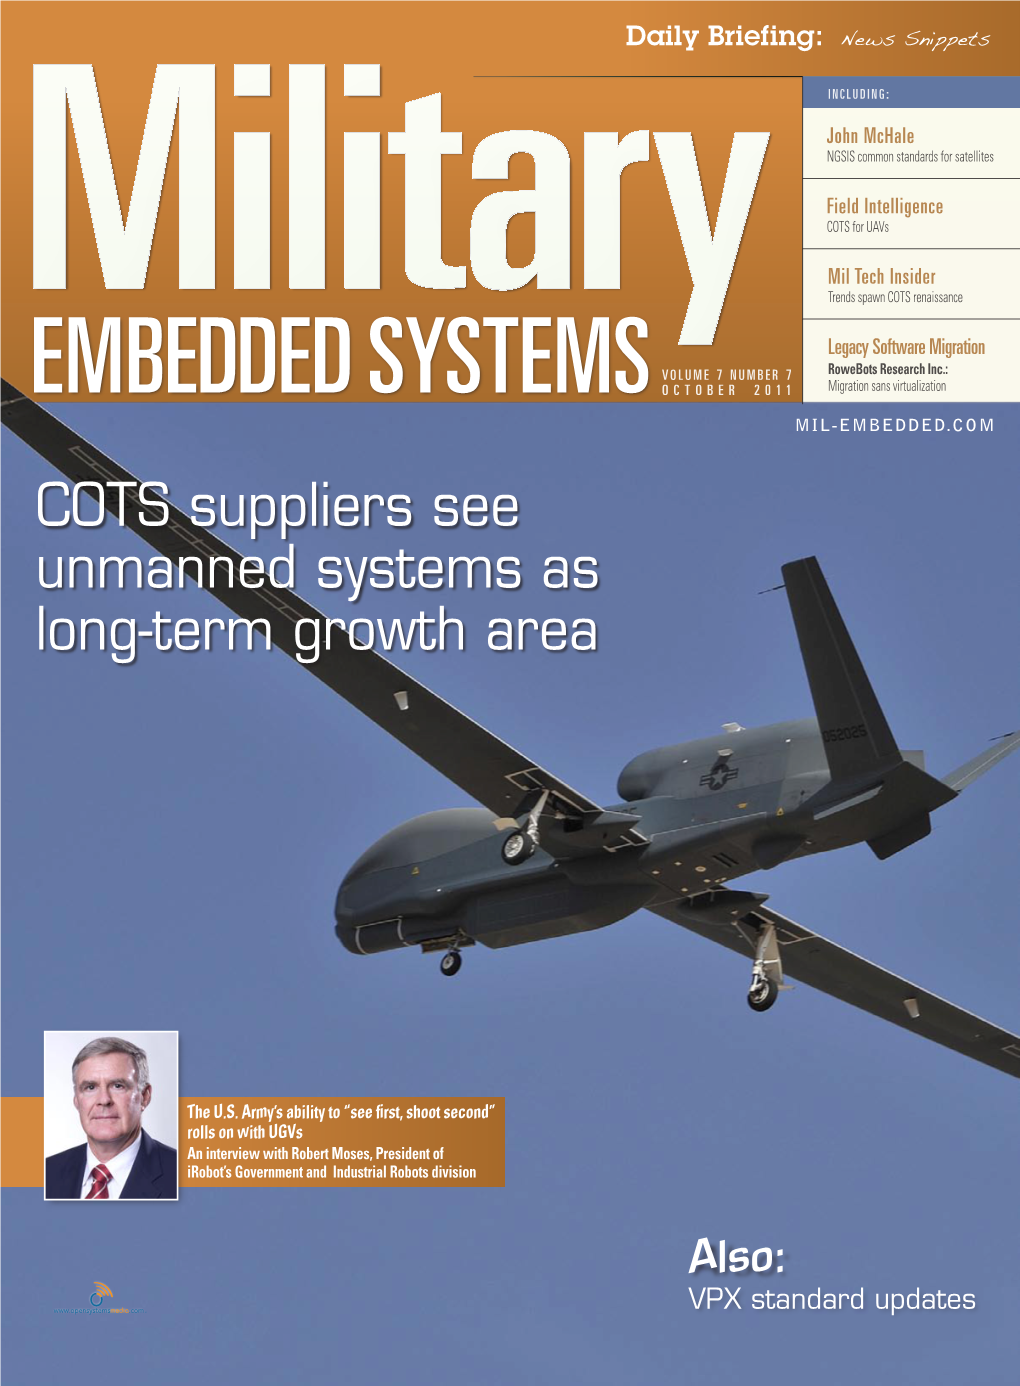 EMBEDDED SYSTEMS OCTOBER 2011 Migration Sans Virtualization MIL-EMBEDDED.COM COTS Suppliers See Unmanned Systems As Long-Term Growth Area